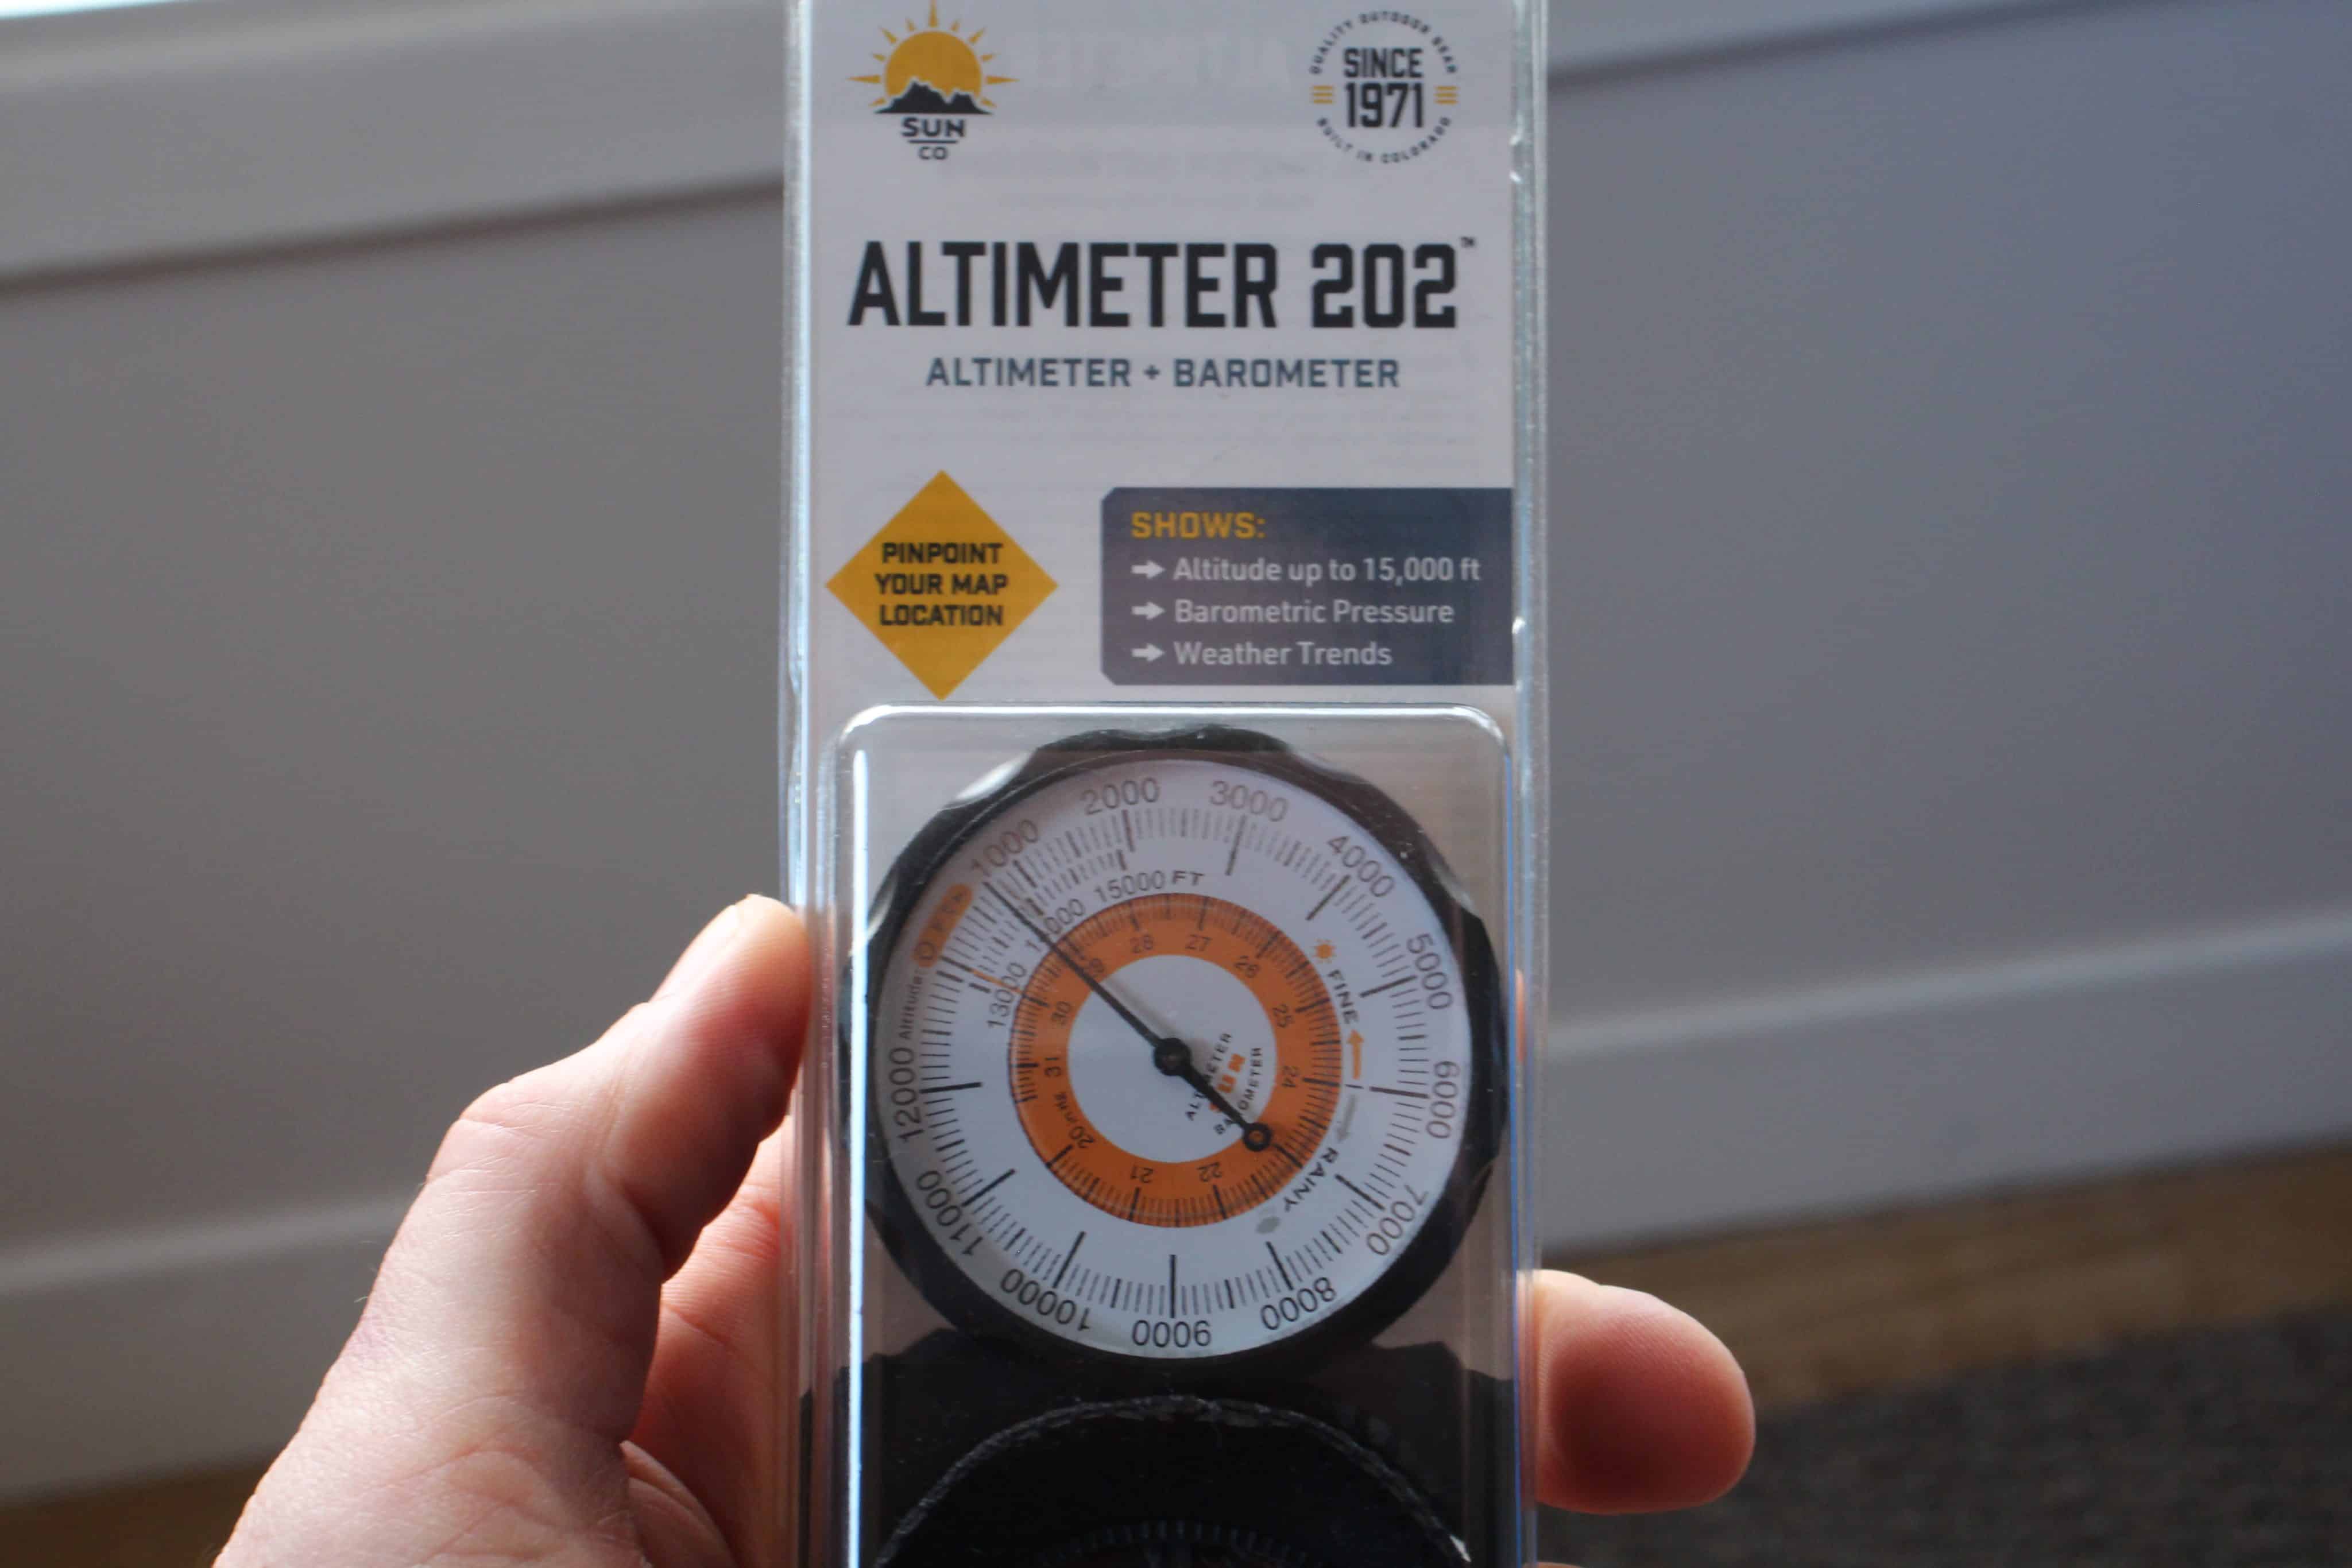 3 Great Products by Sun Company: Altimeter, Compass, and Thermometer 1